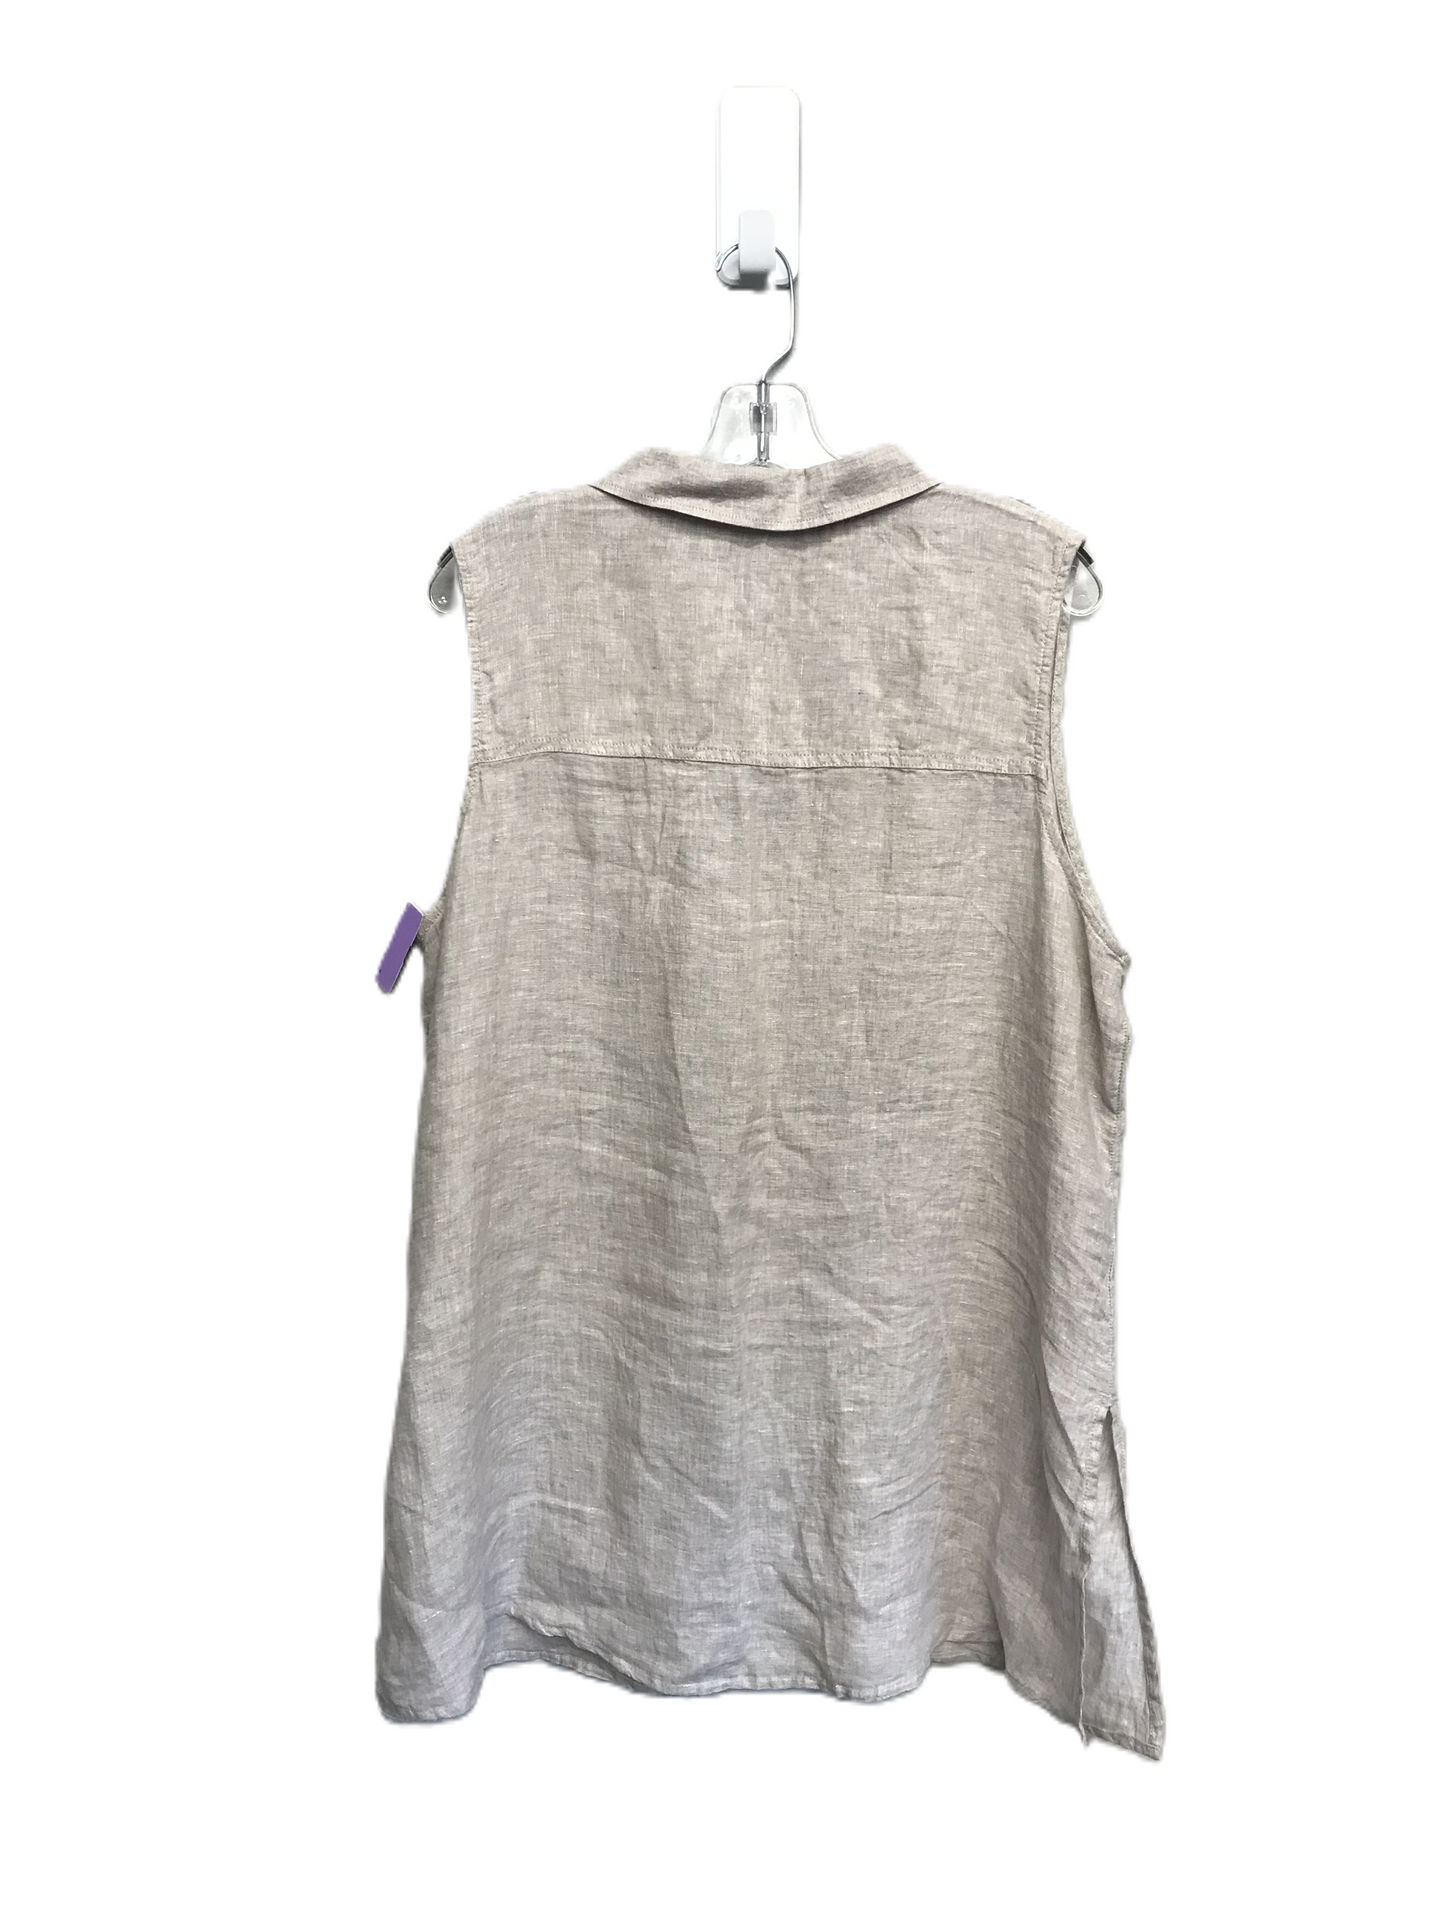 Beige Top Sleeveless By Tahari By Arthur Levine, Size: 1x